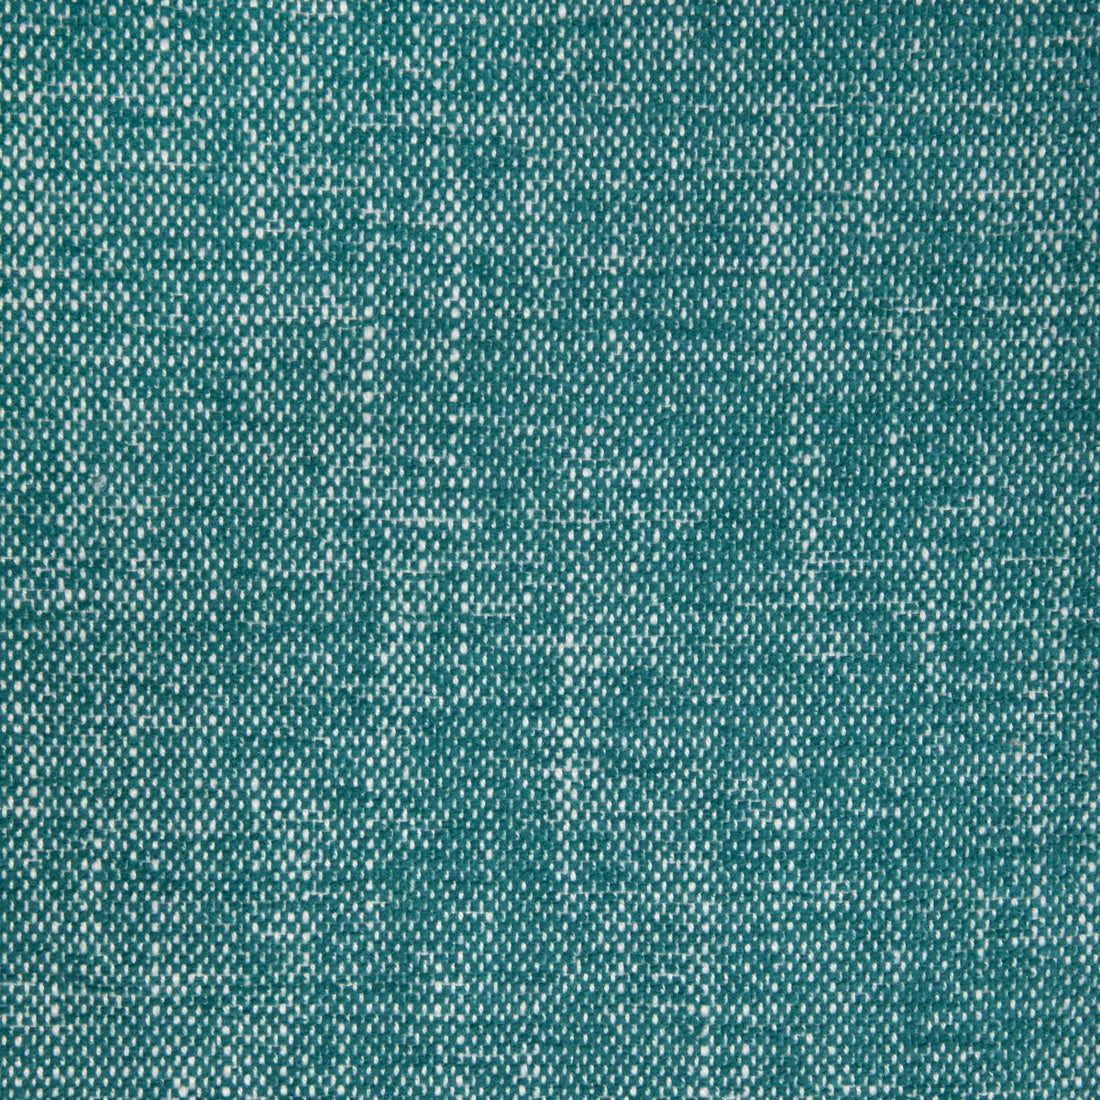 Kravet Smart-36885 fabric in 35 color - pattern 36885.35.0 - by Kravet Smart in the Inside Out Performance Fabrics collection